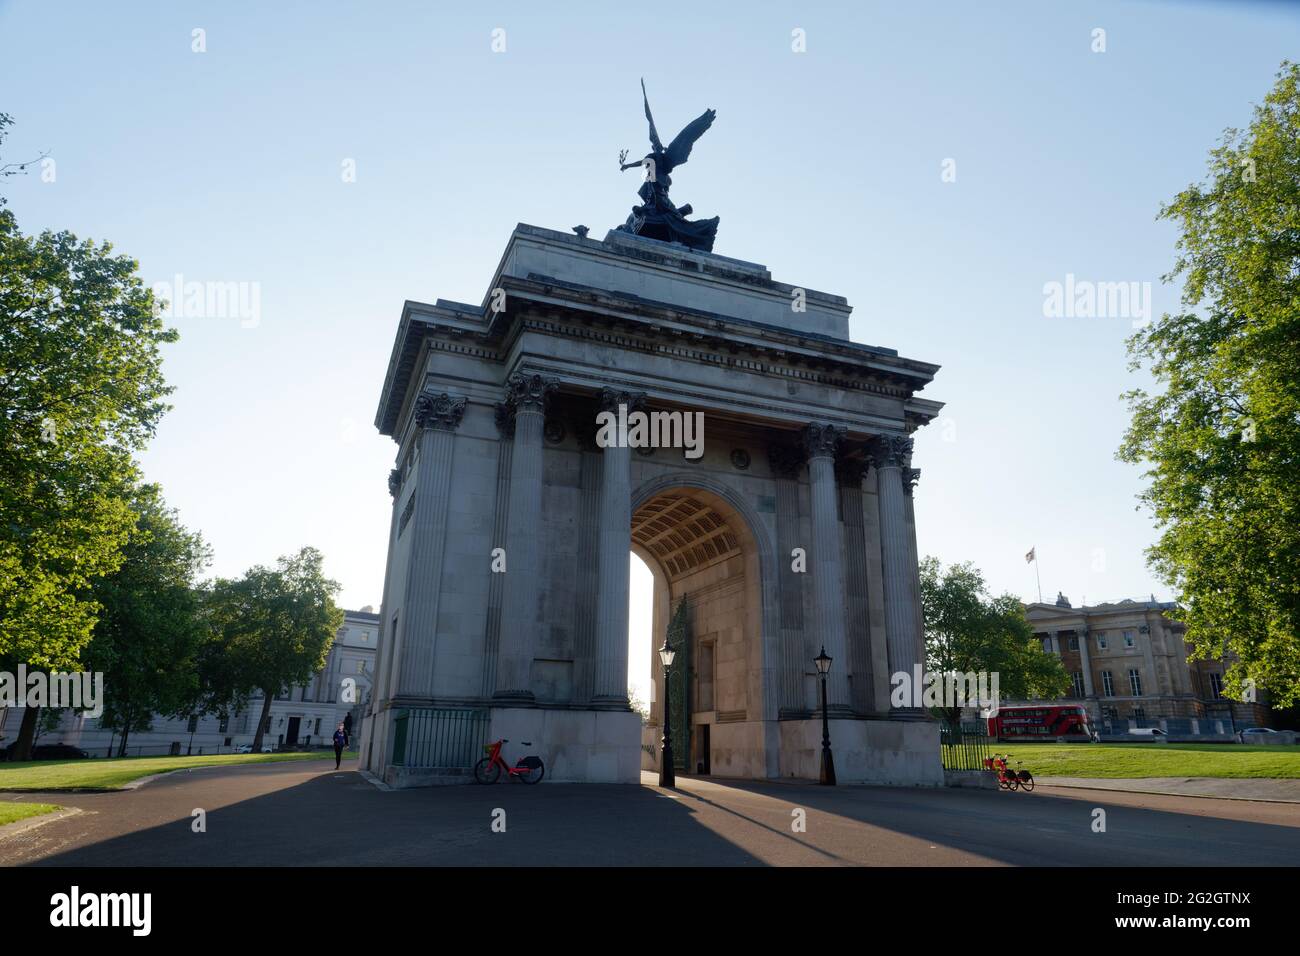 London, Greater London, England - 27 May 2021:  Wellington Arch aka Constitution Arch in Hyde Park Corner Stock Photo